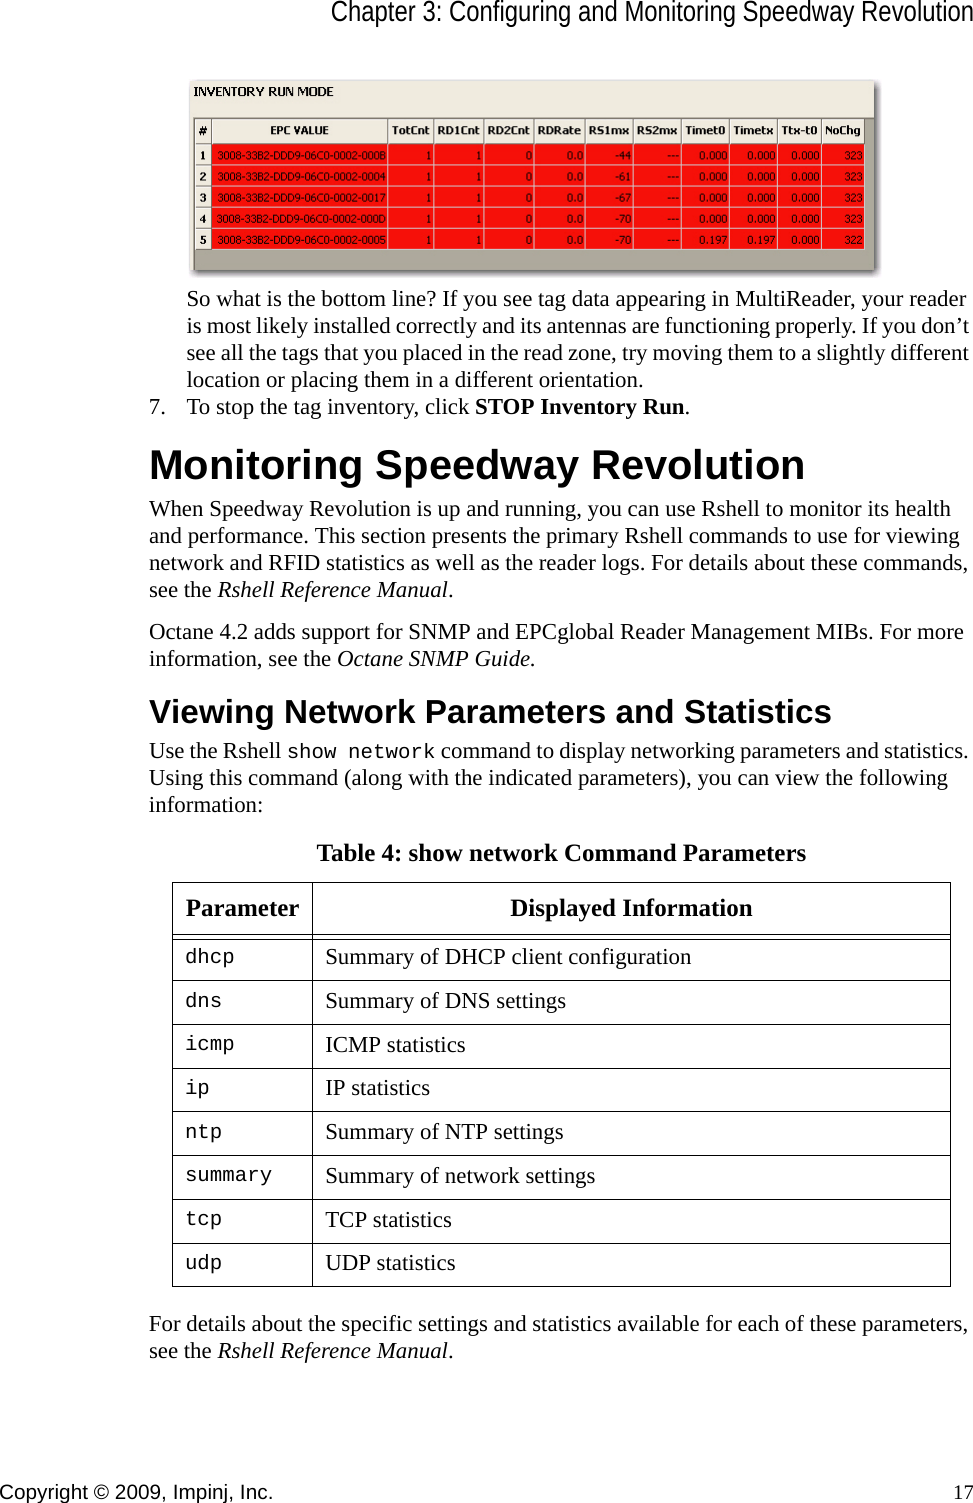 Chapter 3: Configuring and Monitoring Speedway RevolutionCopyright © 2009, Impinj, Inc. 17So what is the bottom line? If you see tag data appearing in MultiReader, your reader is most likely installed correctly and its antennas are functioning properly. If you don’t see all the tags that you placed in the read zone, try moving them to a slightly different location or placing them in a different orientation.7. To stop the tag inventory, click STOP Inventory Run.Monitoring Speedway RevolutionWhen Speedway Revolution is up and running, you can use Rshell to monitor its health and performance. This section presents the primary Rshell commands to use for viewing network and RFID statistics as well as the reader logs. For details about these commands, see the Rshell Reference Manual.Octane 4.2 adds support for SNMP and EPCglobal Reader Management MIBs. For more information, see the Octane SNMP Guide.Viewing Network Parameters and StatisticsUse the Rshell show network command to display networking parameters and statistics. Using this command (along with the indicated parameters), you can view the following information:For details about the specific settings and statistics available for each of these parameters, see the Rshell Reference Manual.Table 4: show network Command ParametersParameter Displayed Informationdhcp Summary of DHCP client configurationdns Summary of DNS settingsicmp ICMP statisticsip IP statisticsntp Summary of NTP settingssummary Summary of network settingstcp TCP statisticsudp UDP statistics